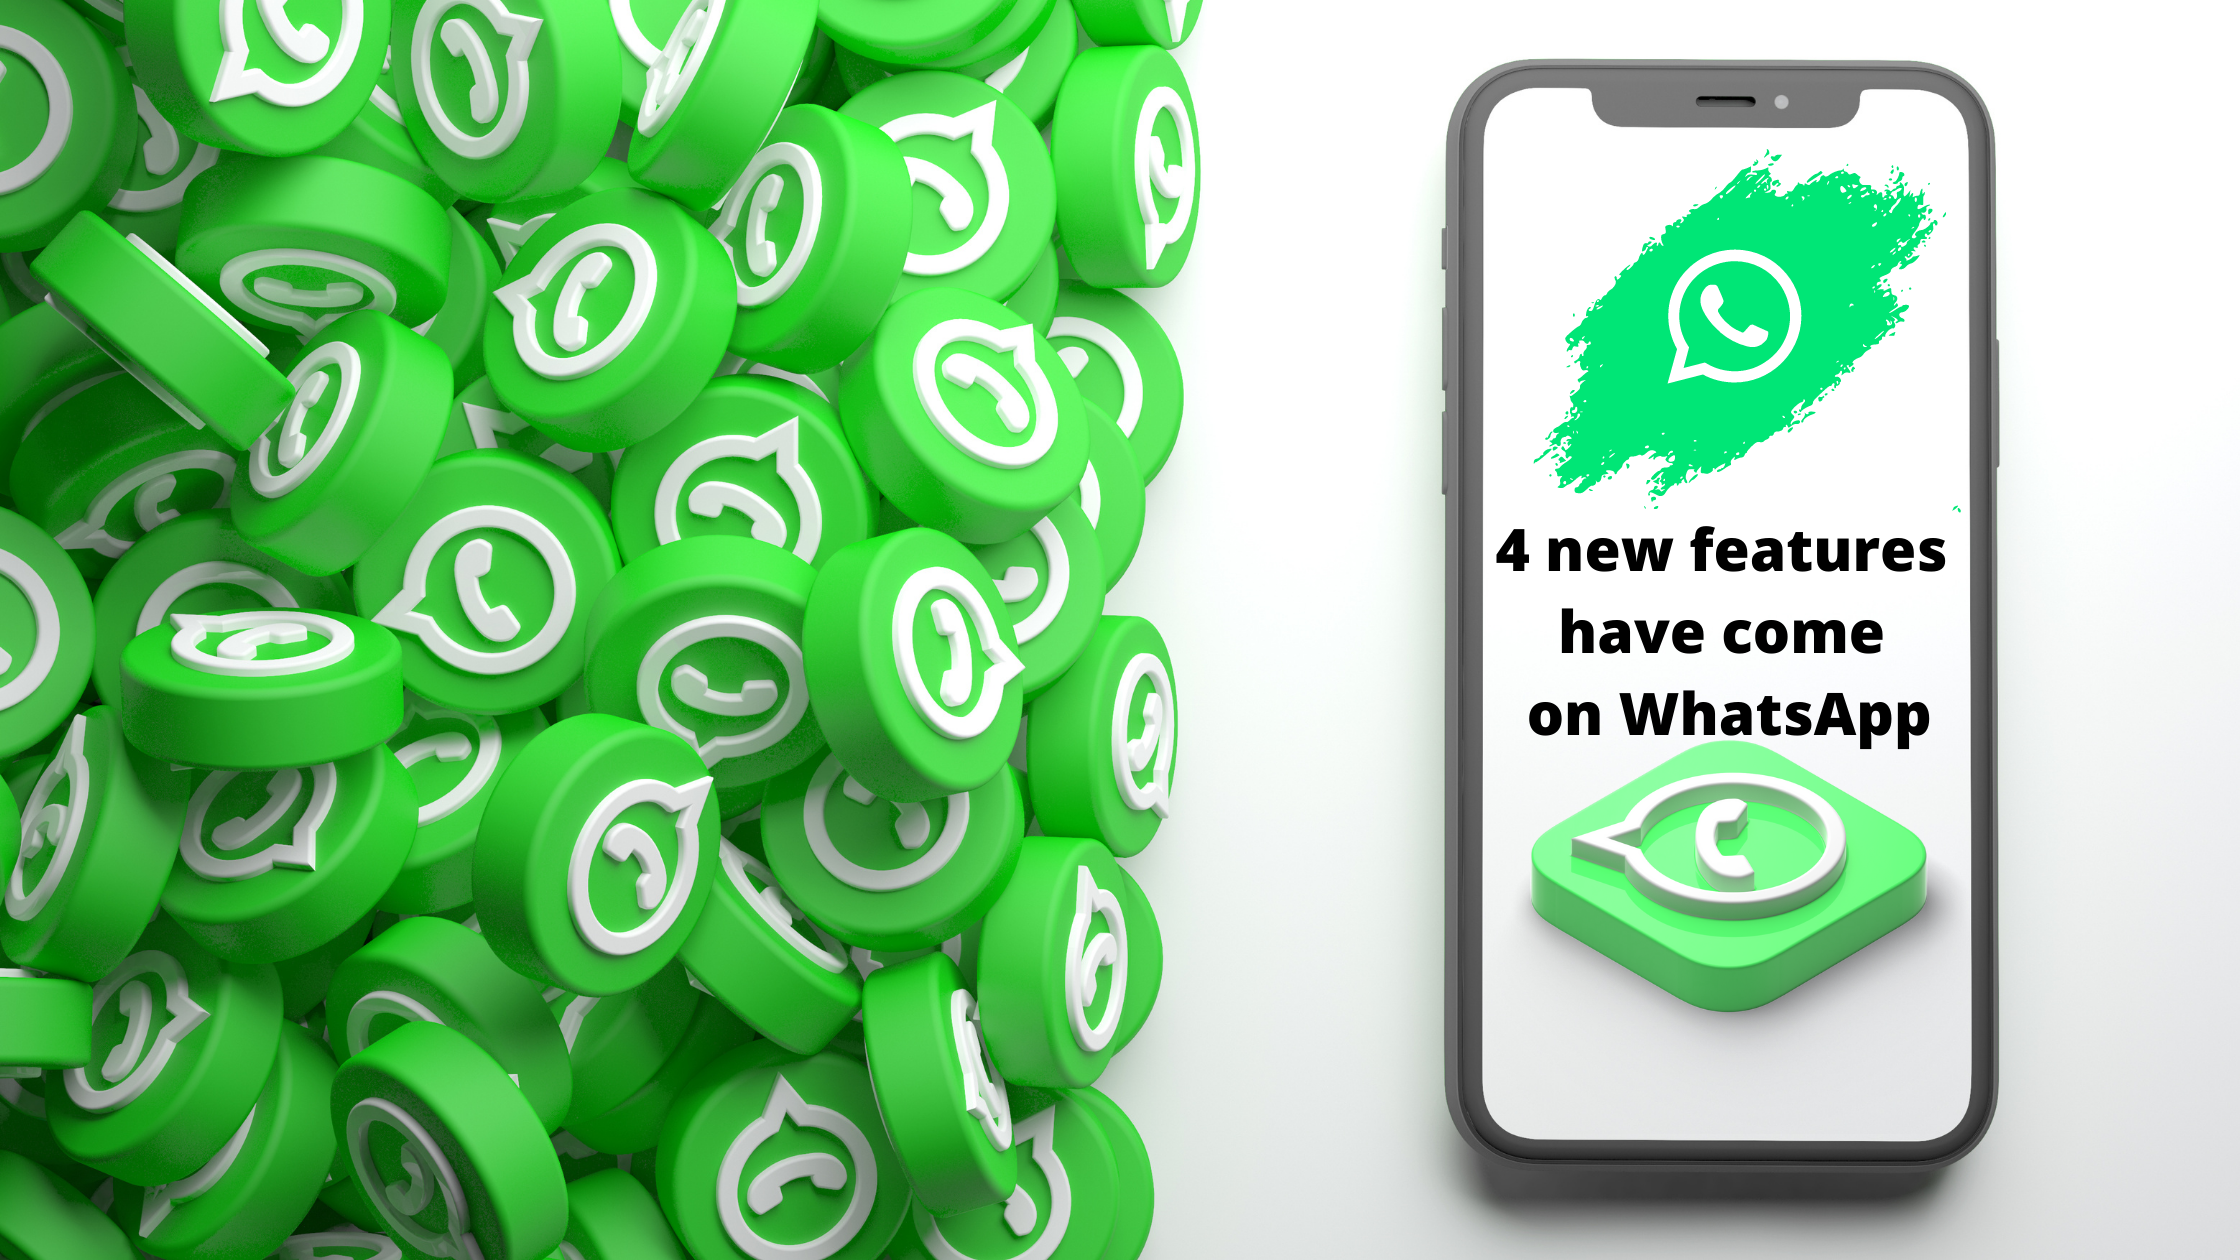 These 4 new features have come on WhatsApp, now it will be double fun to use